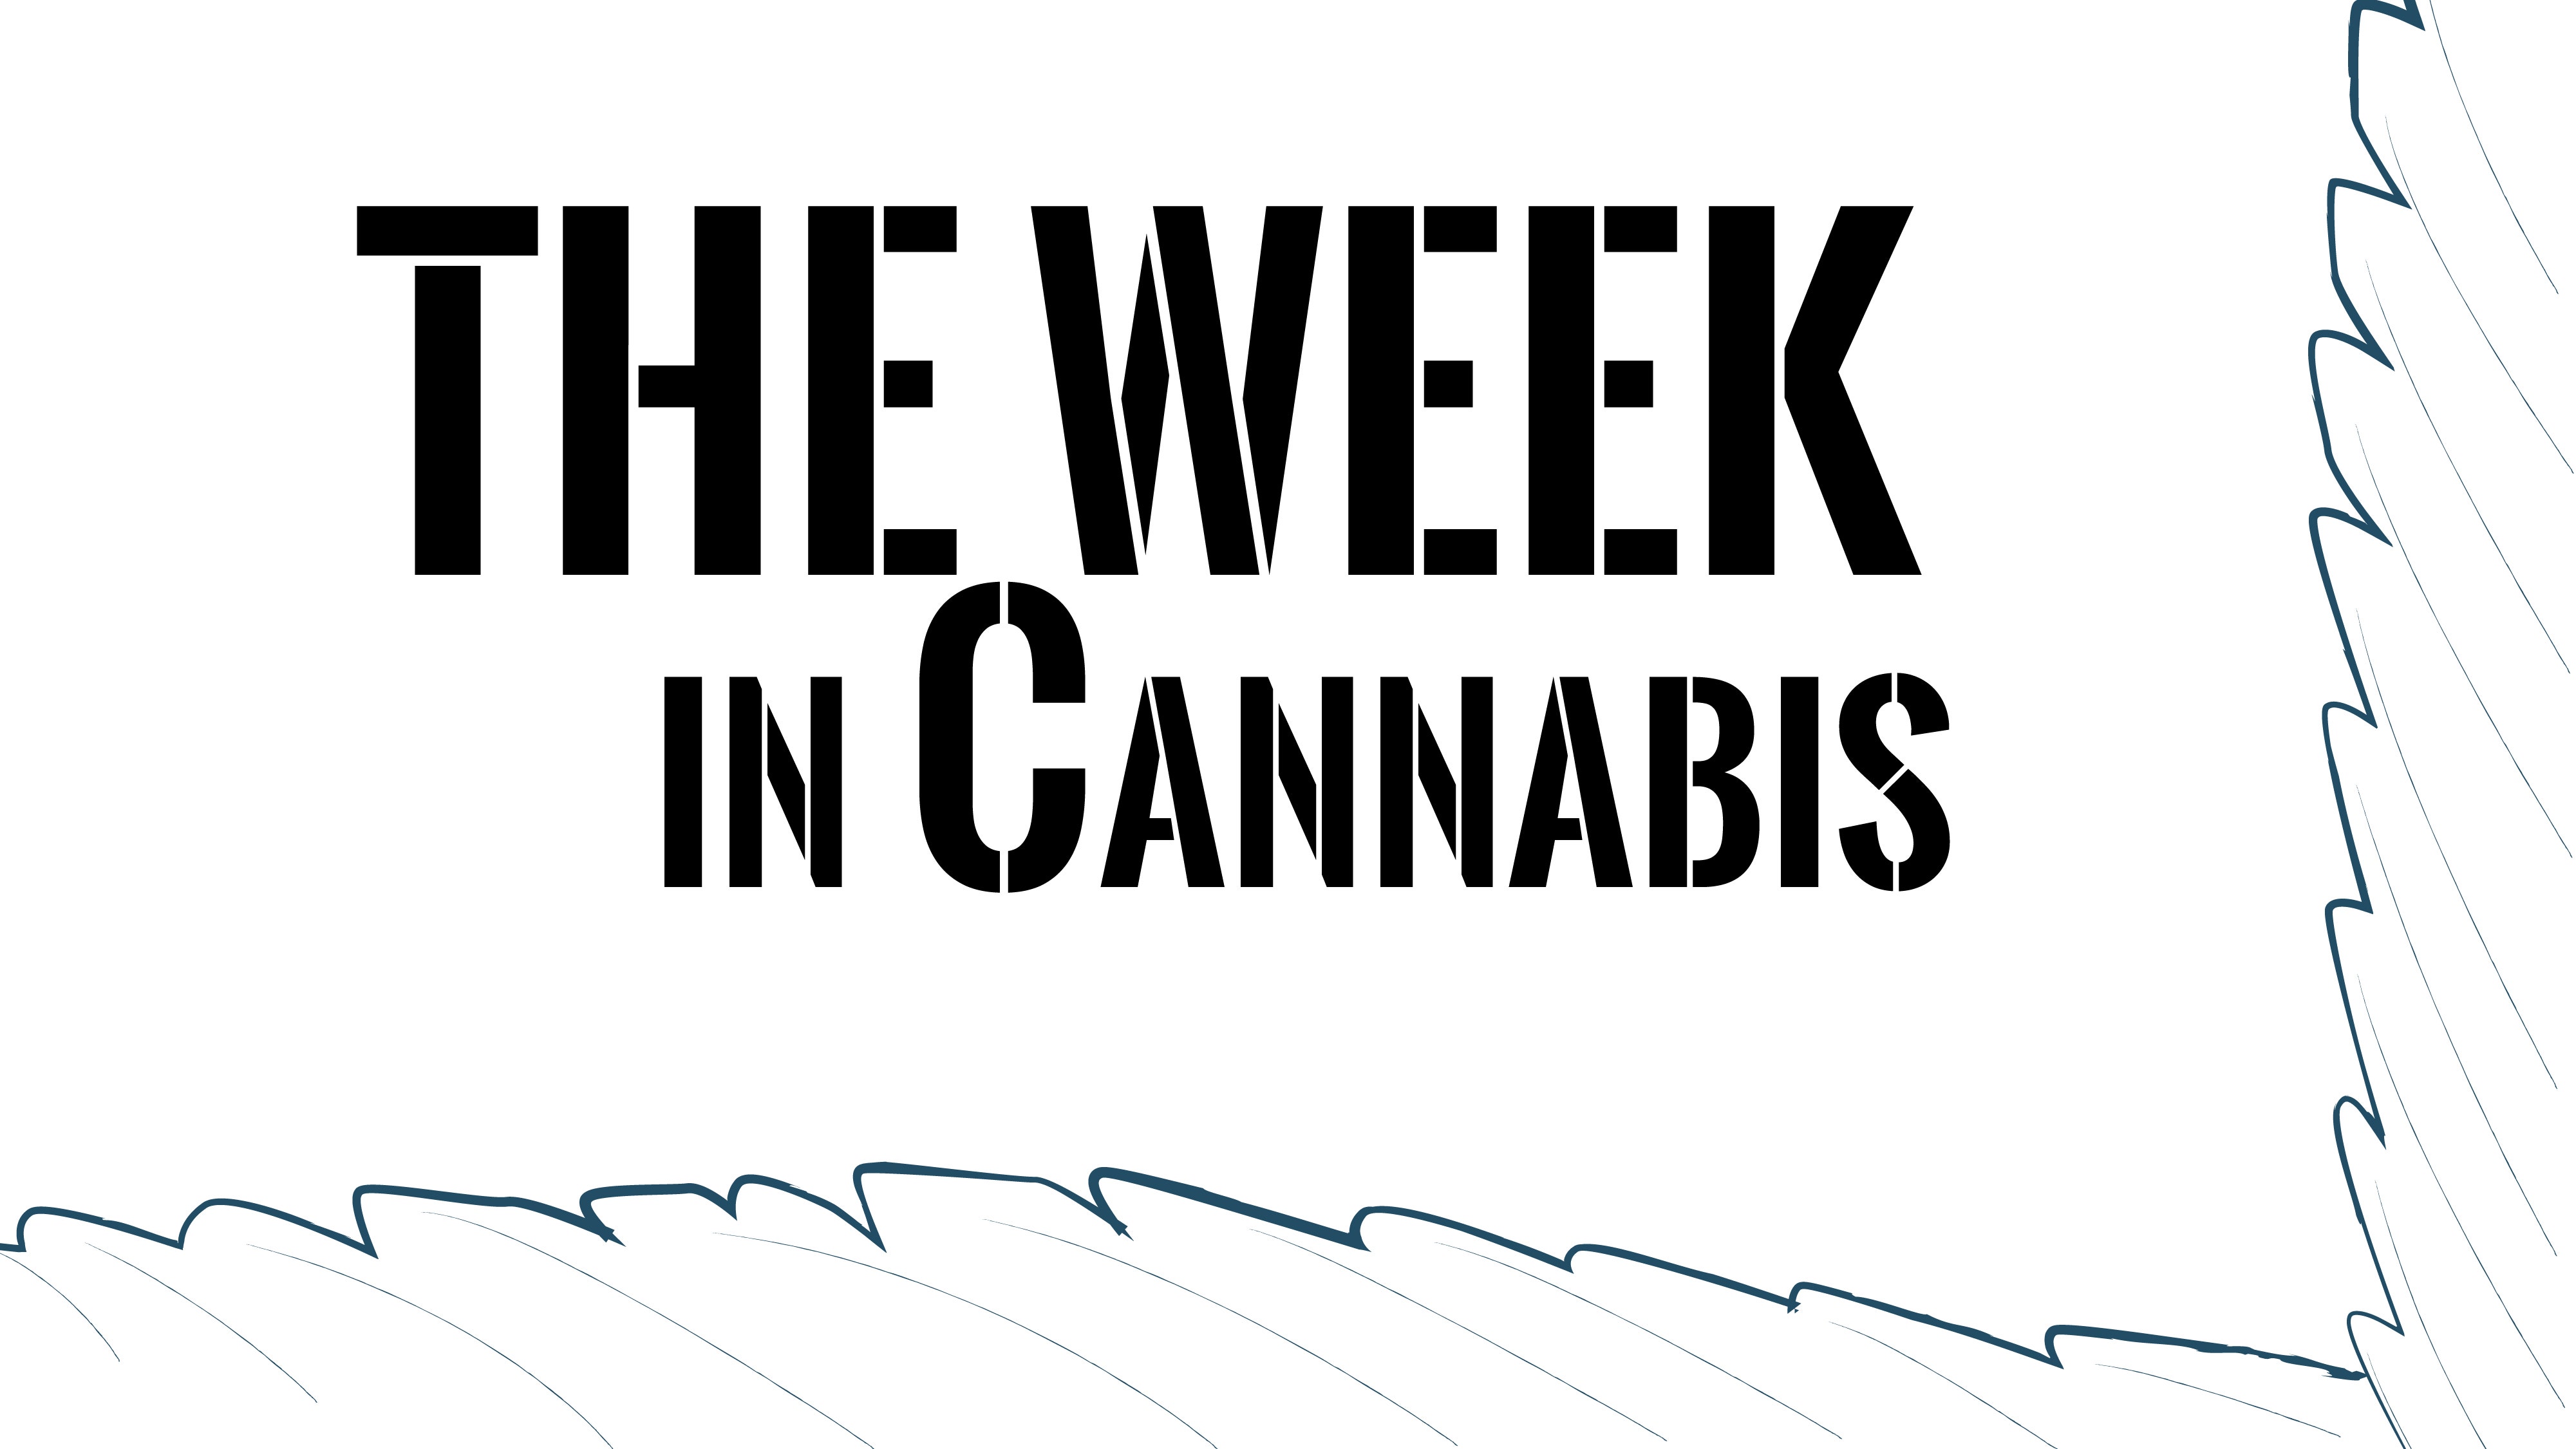 The Week In Cannabis: ETFs Are Down, Virginia Legalizes, Houseplant Hits The US, Big Retail Makes Moves